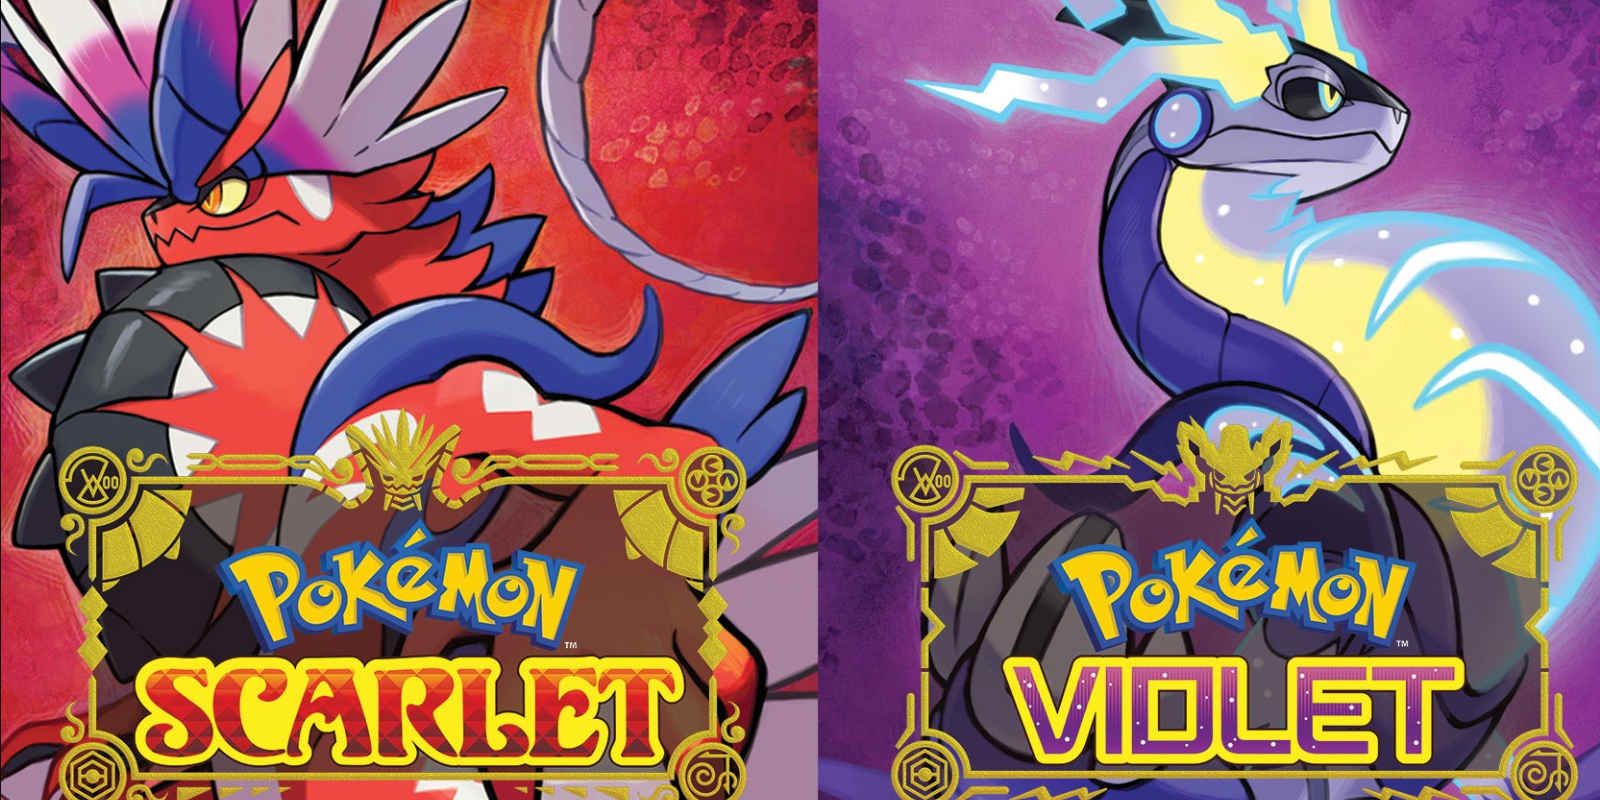 The legendary pokemon from Scarlet and Violet side by side